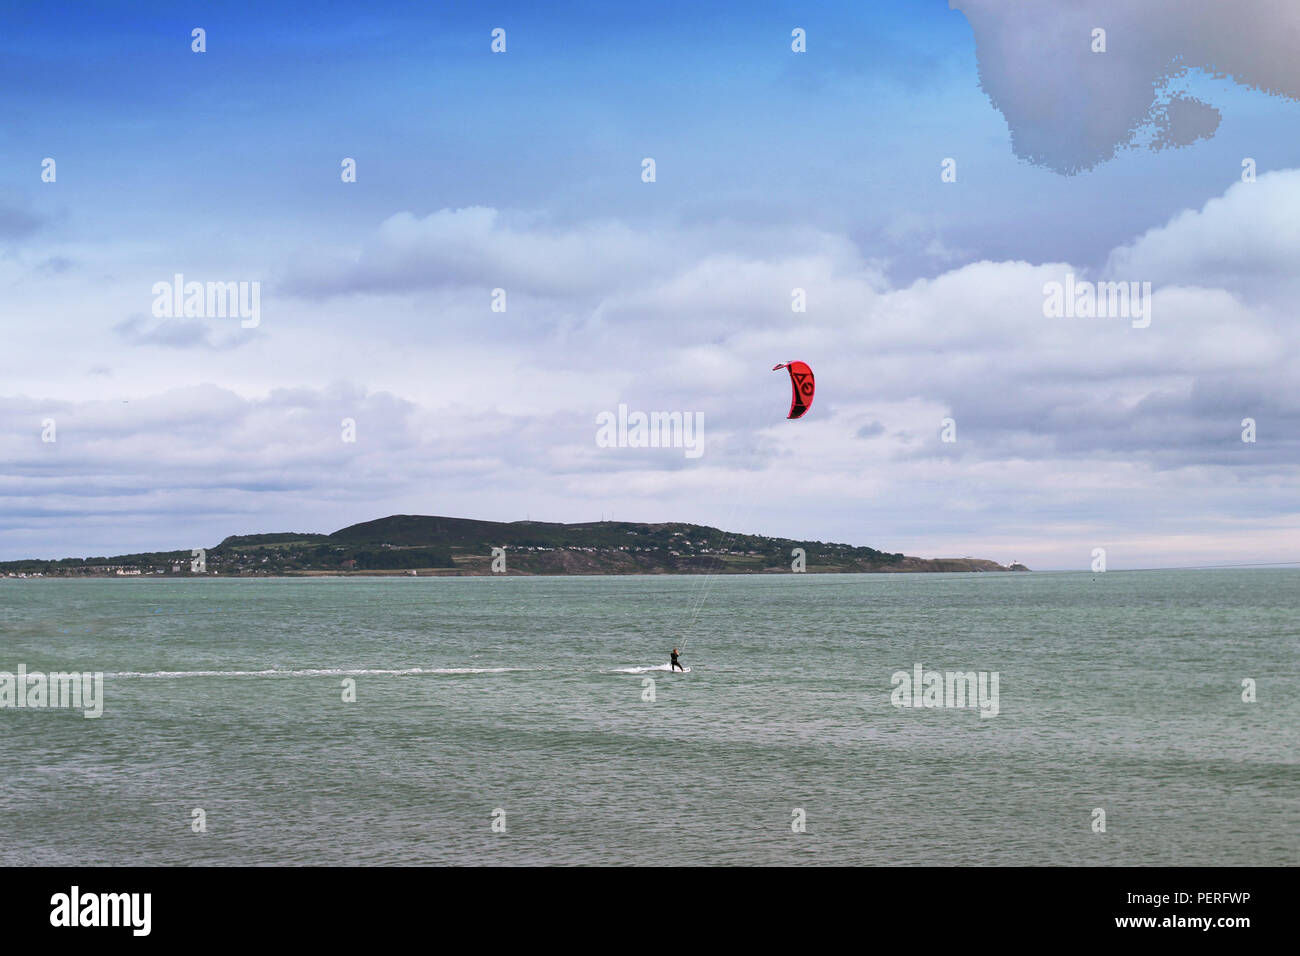 Dublin, Ireland, 15/08/2018. kite surfing in Dublin Bay, opposite Dollymount strand with Howth Head in the background. Stock Photo